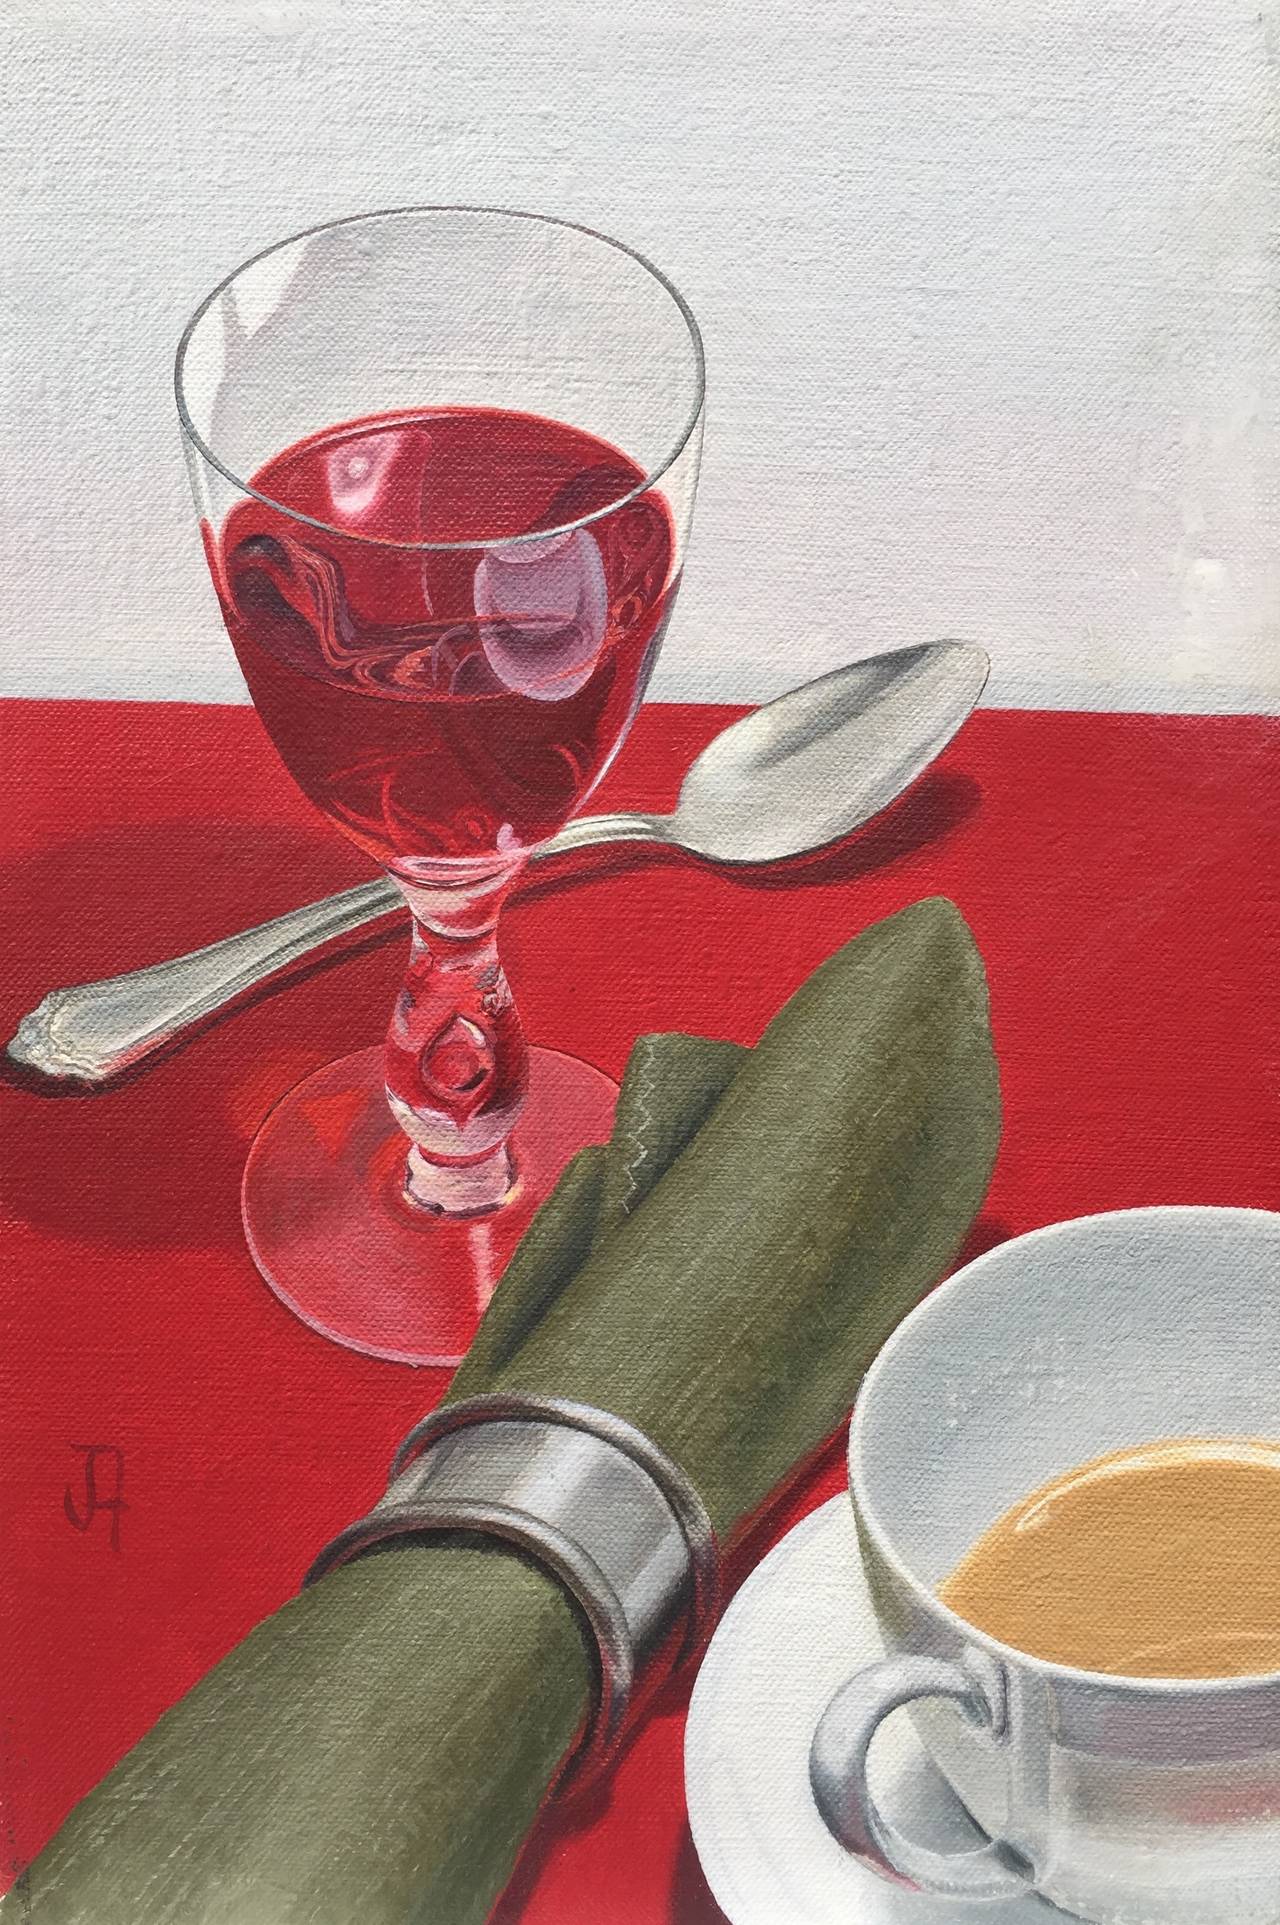 "Still Life with Red Wine"